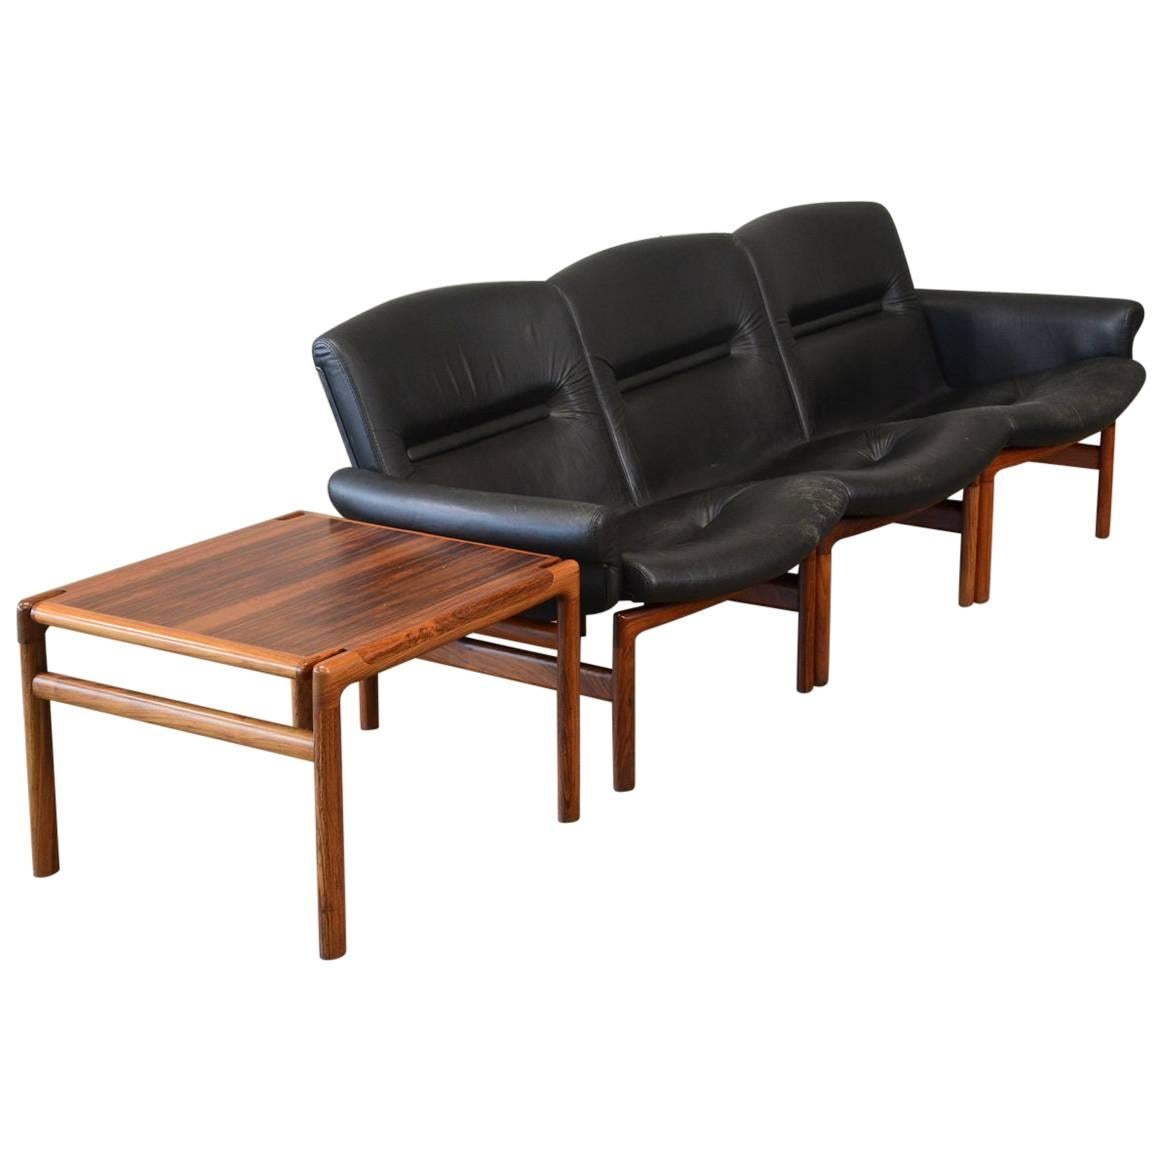 Modular Rosewood and Black Leather Sofa Set For Sale